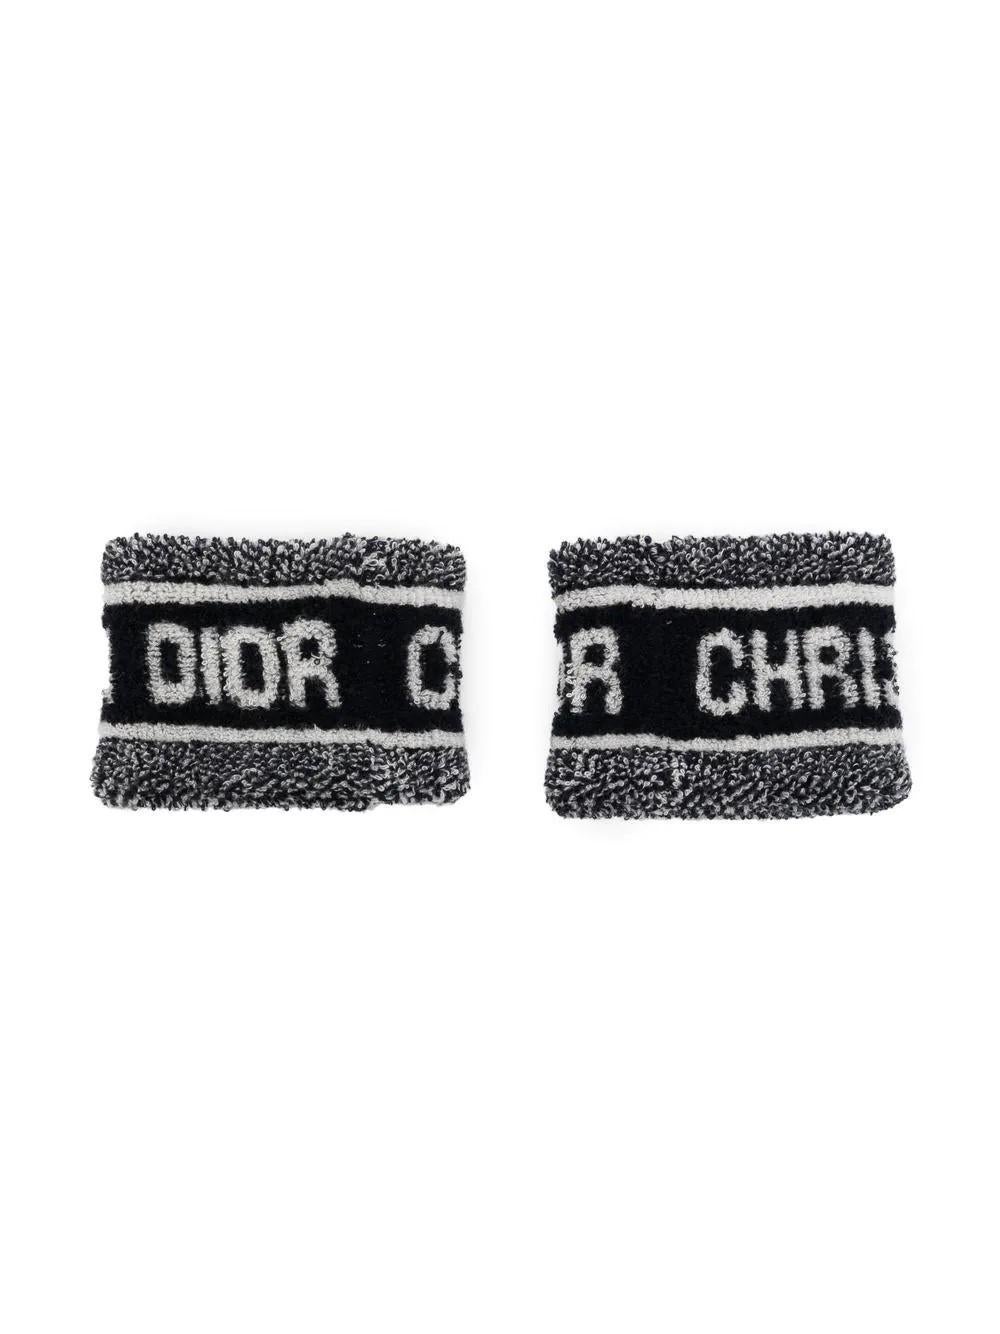 Women's or Men's Christian Dior Terry Wristbands 